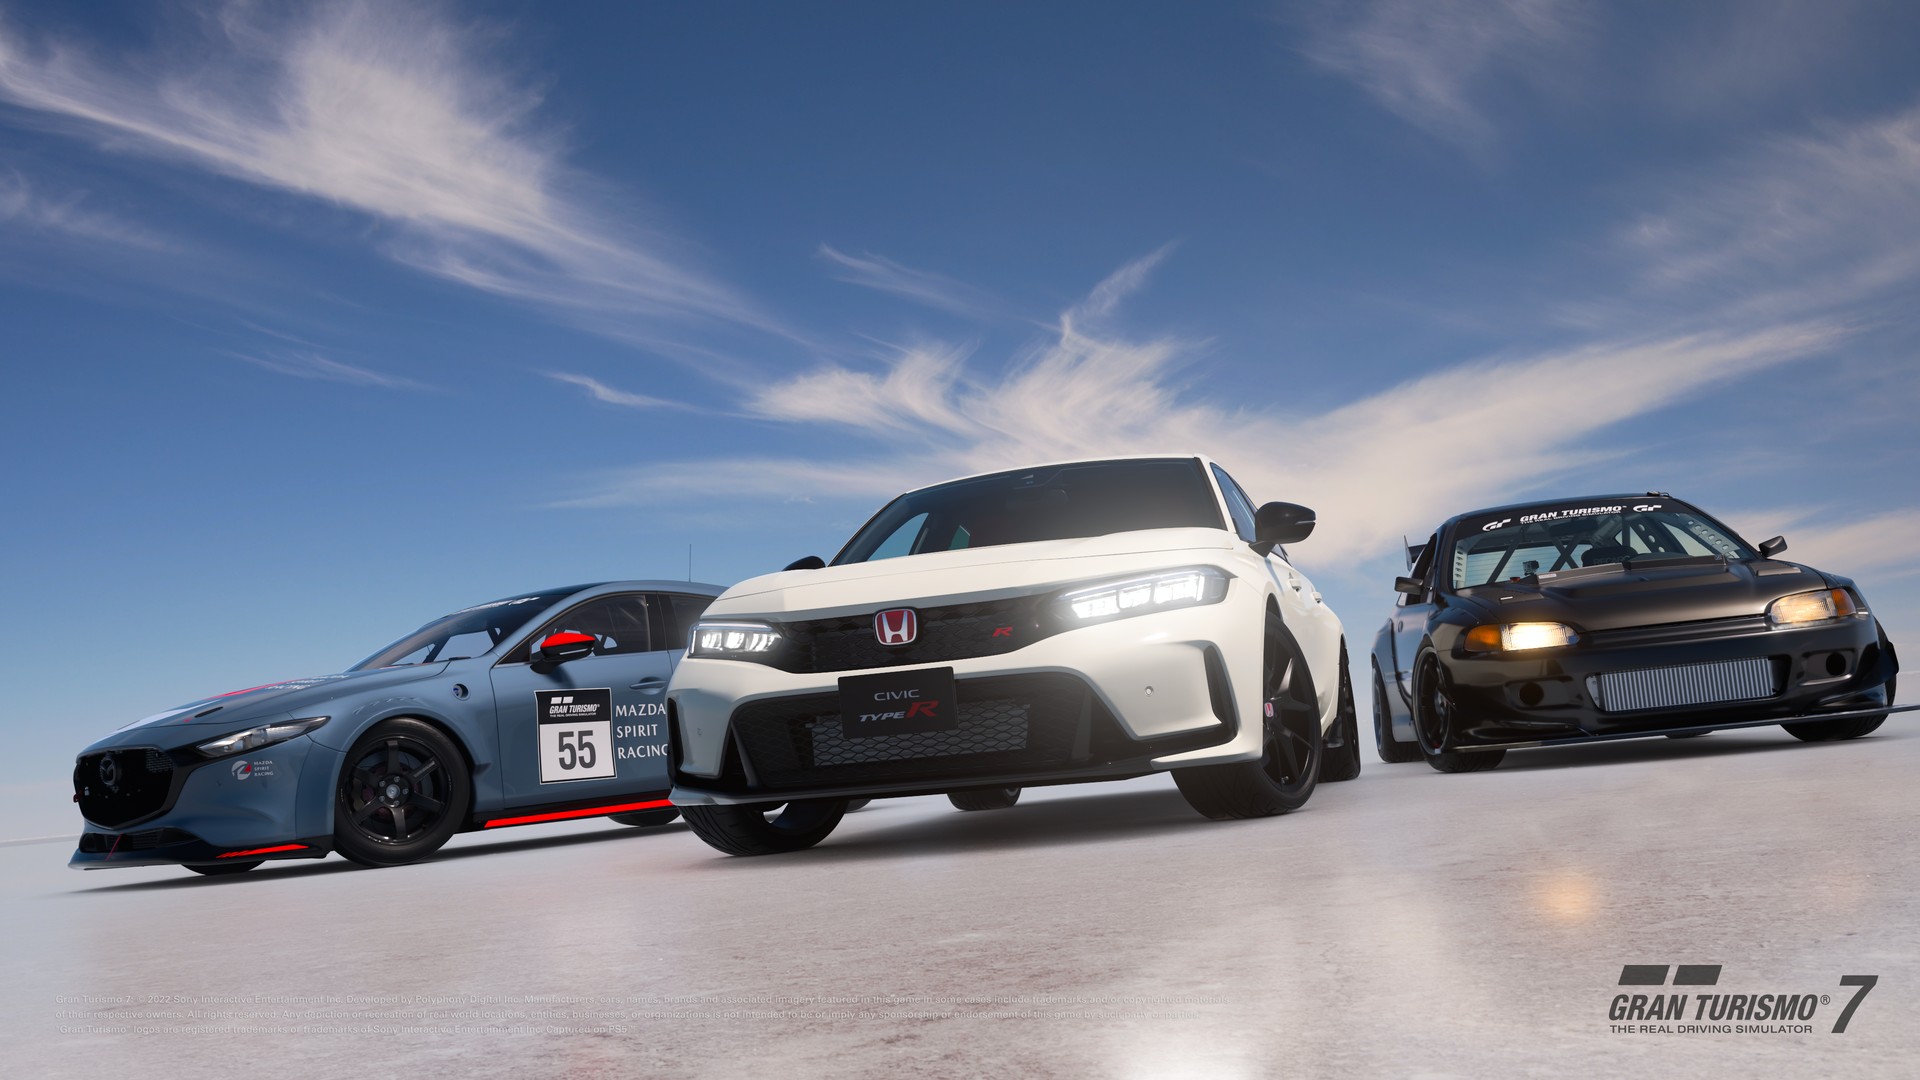 Gran Turismo 7: 3 Brand New Cars Coming Soon - BoxThisLap